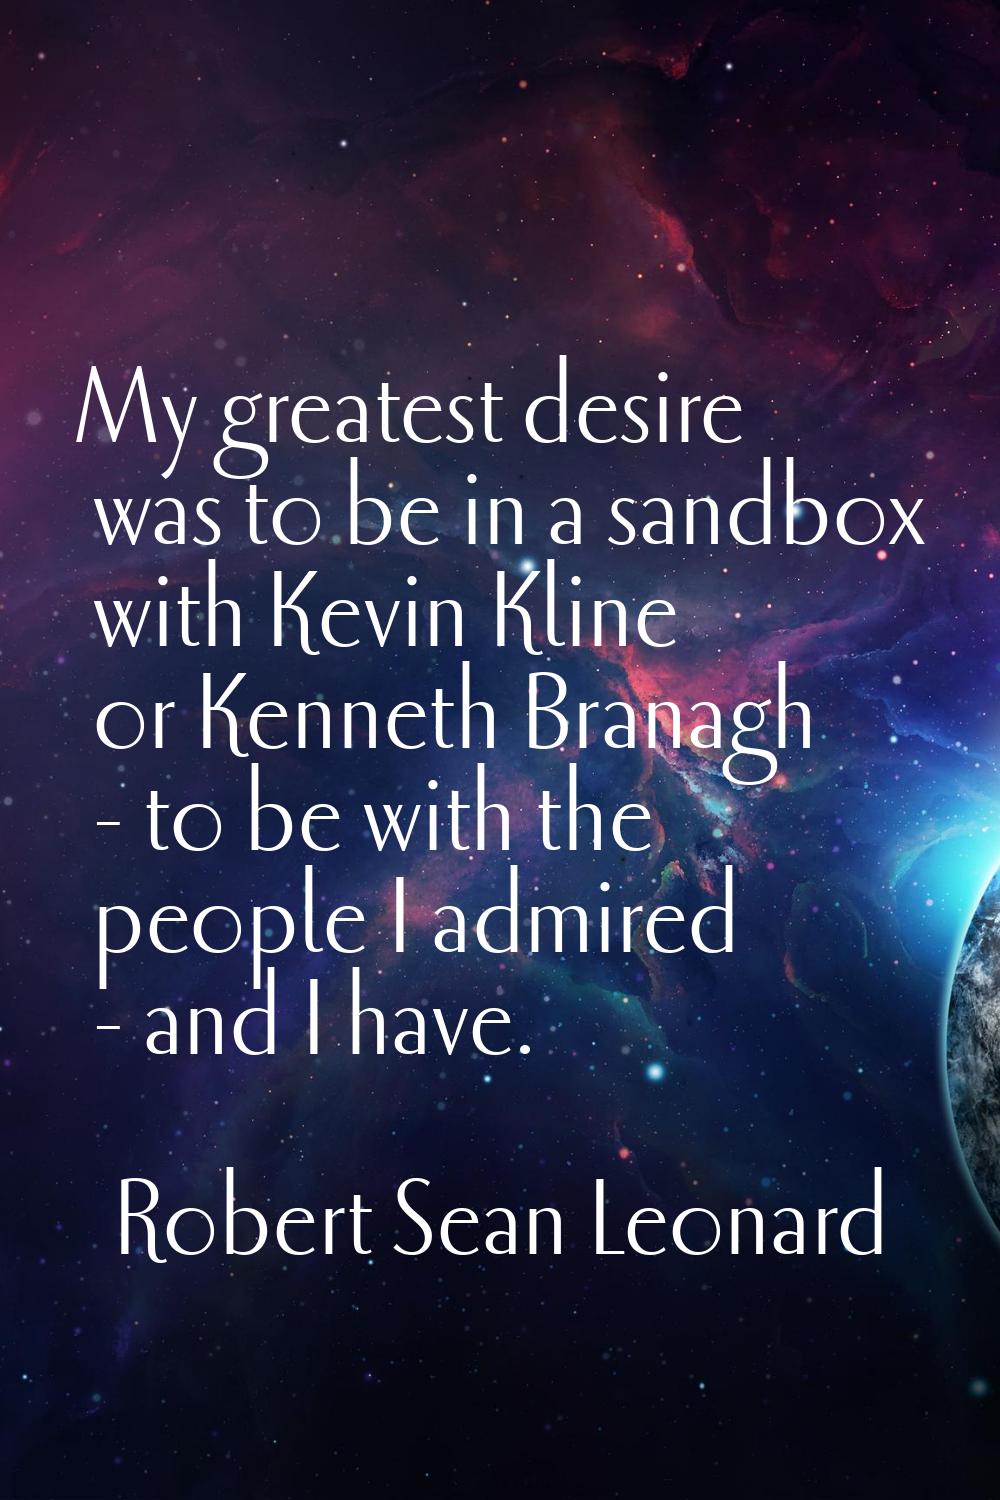 My greatest desire was to be in a sandbox with Kevin Kline or Kenneth Branagh - to be with the peop